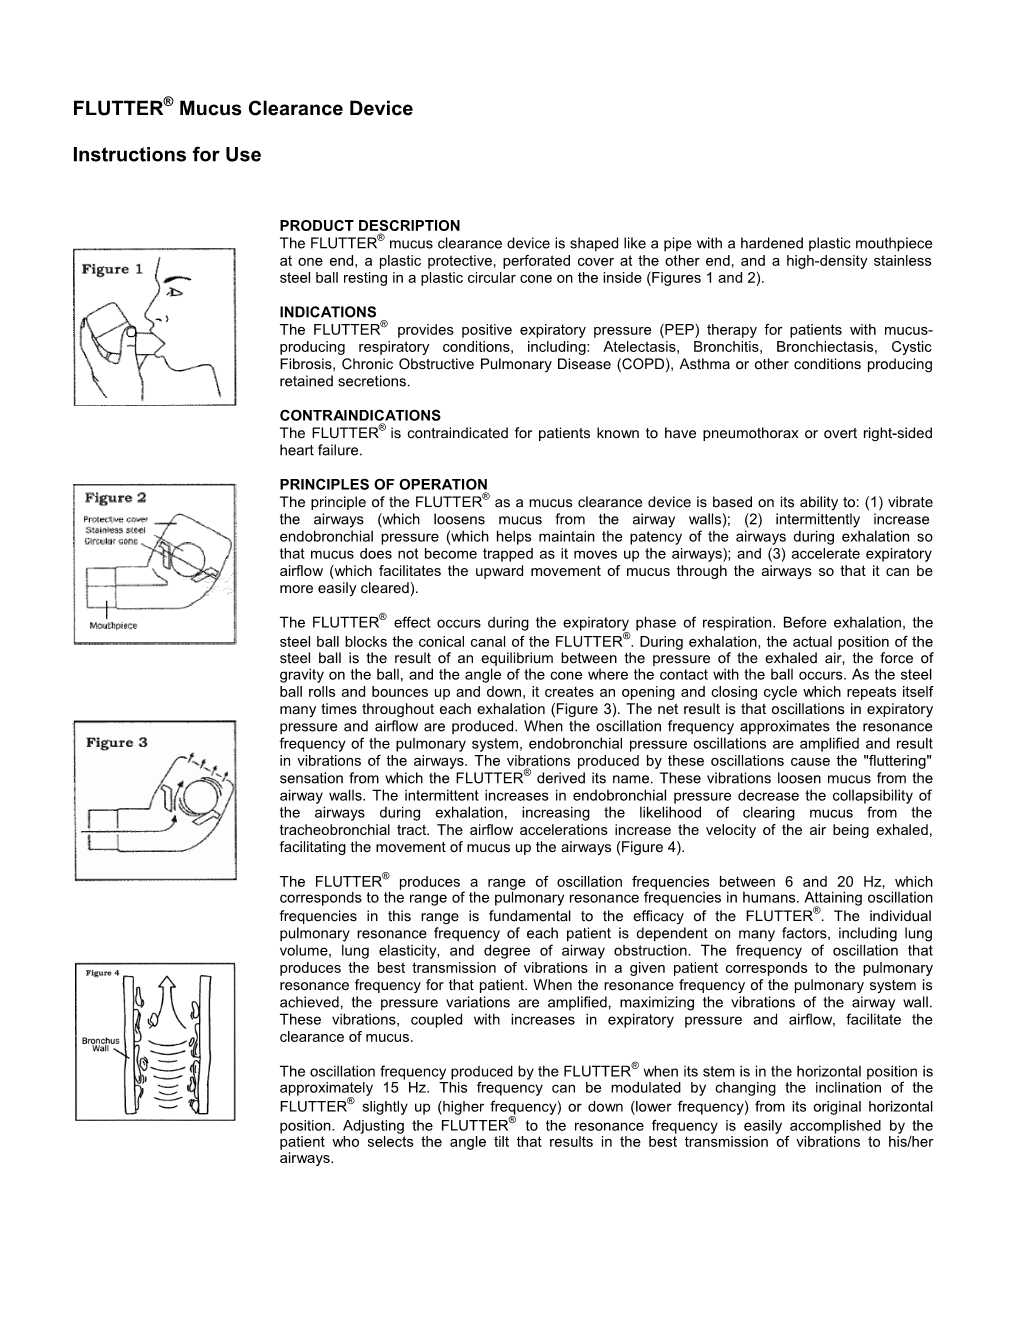 FLUTTER® Mucus Clearance Device Instructions For